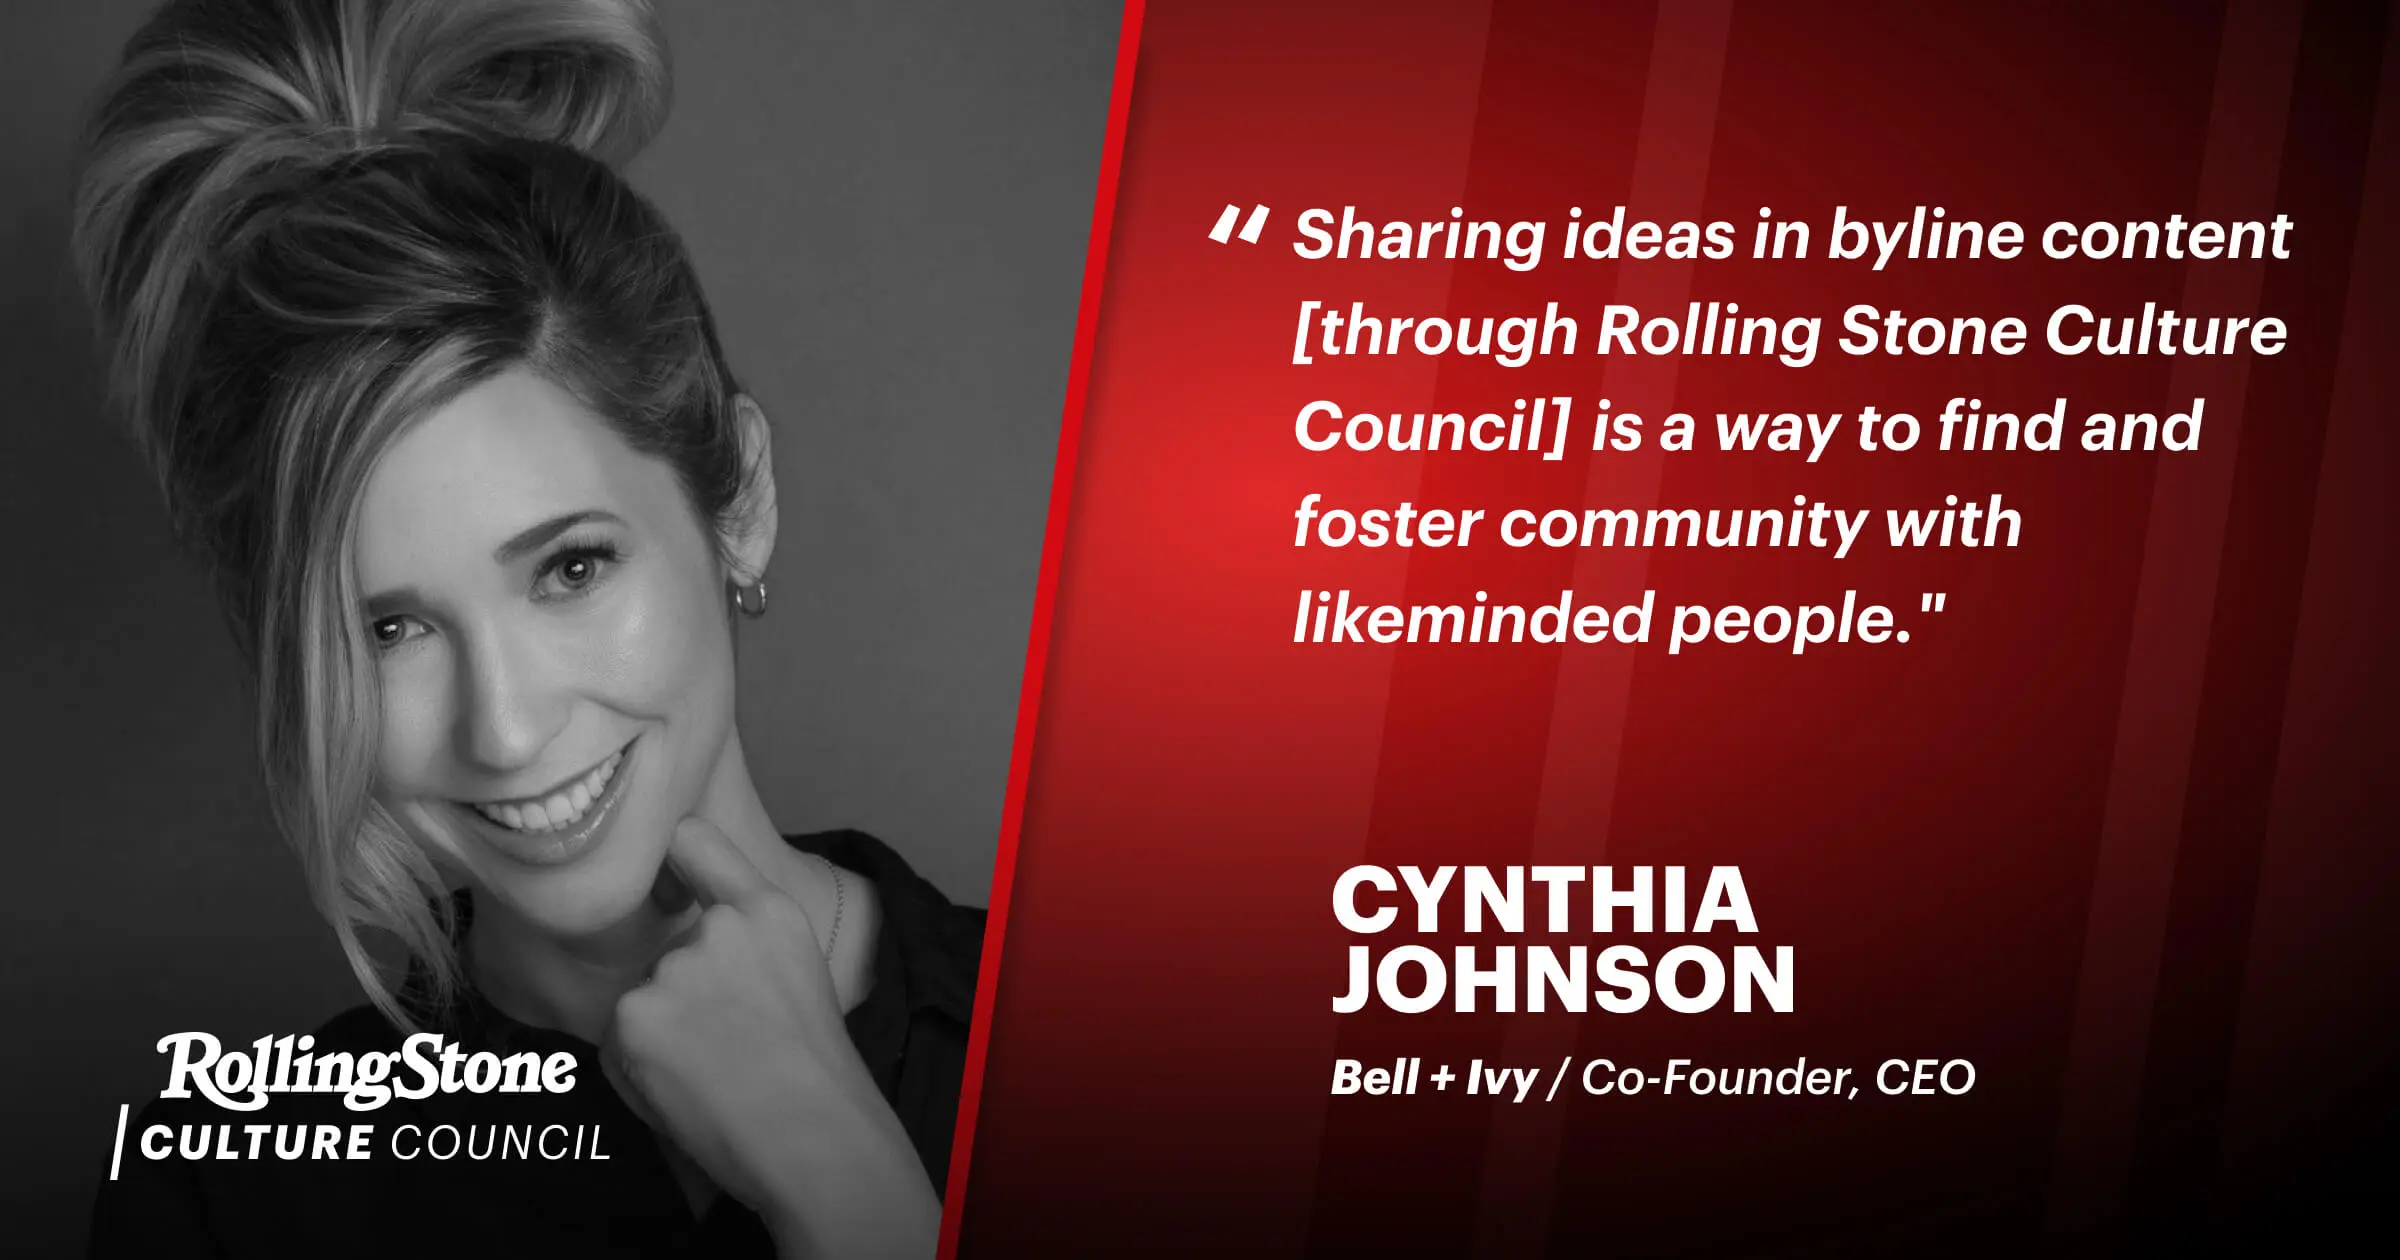 Rolling Stone Culture Helps Cynthia Johnson Forge New Business Partnerships